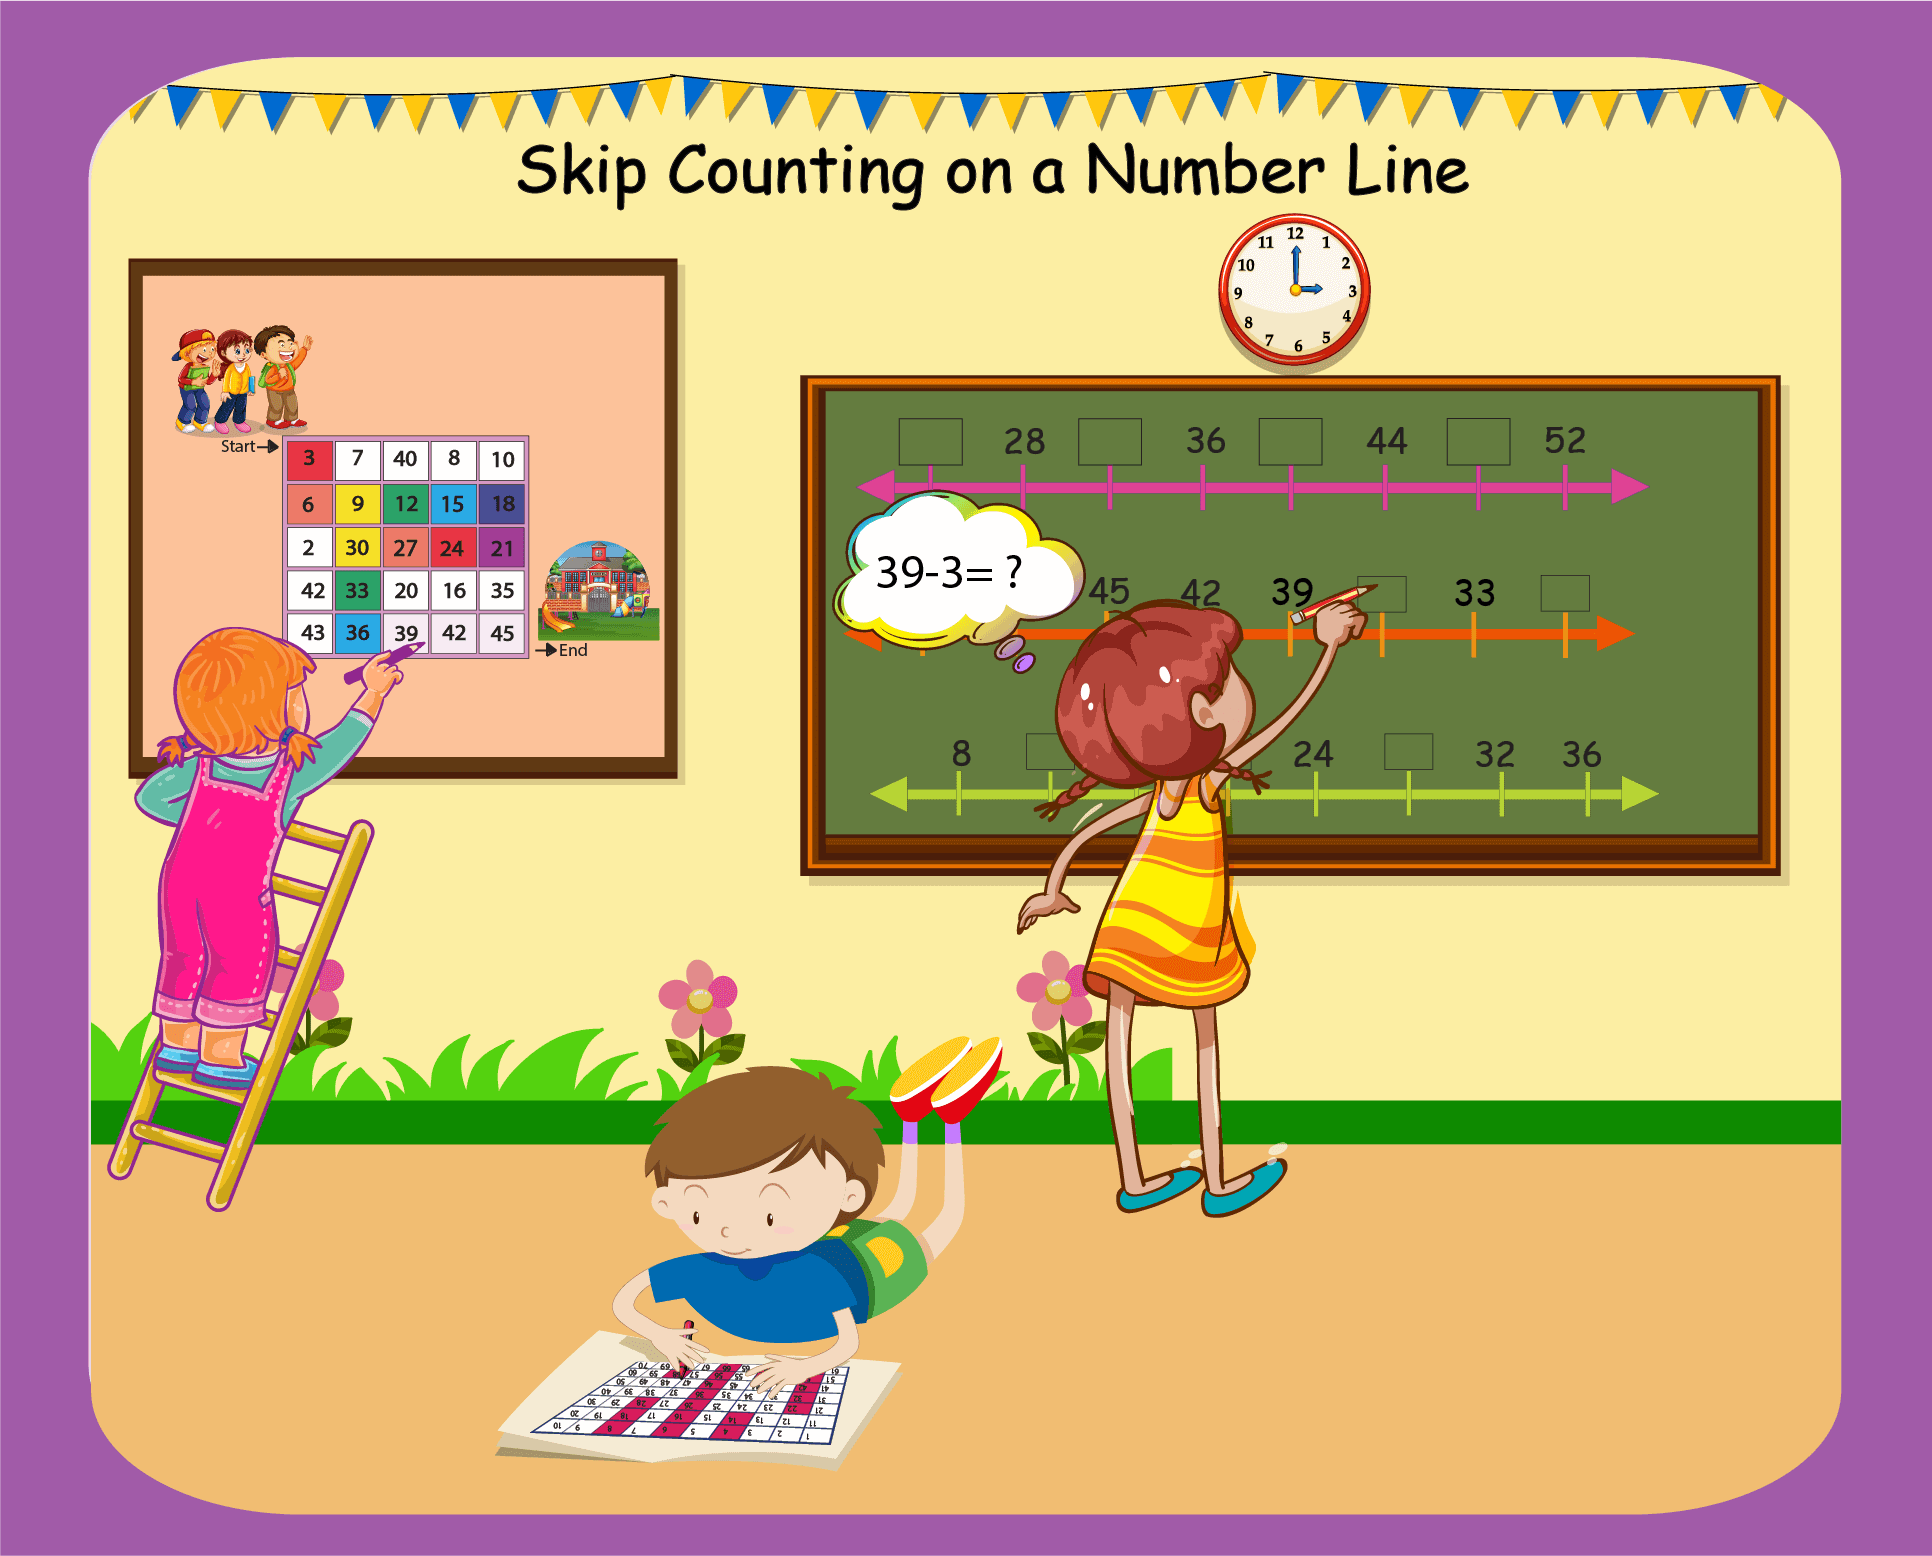 Skip Counting on a Number Line overview